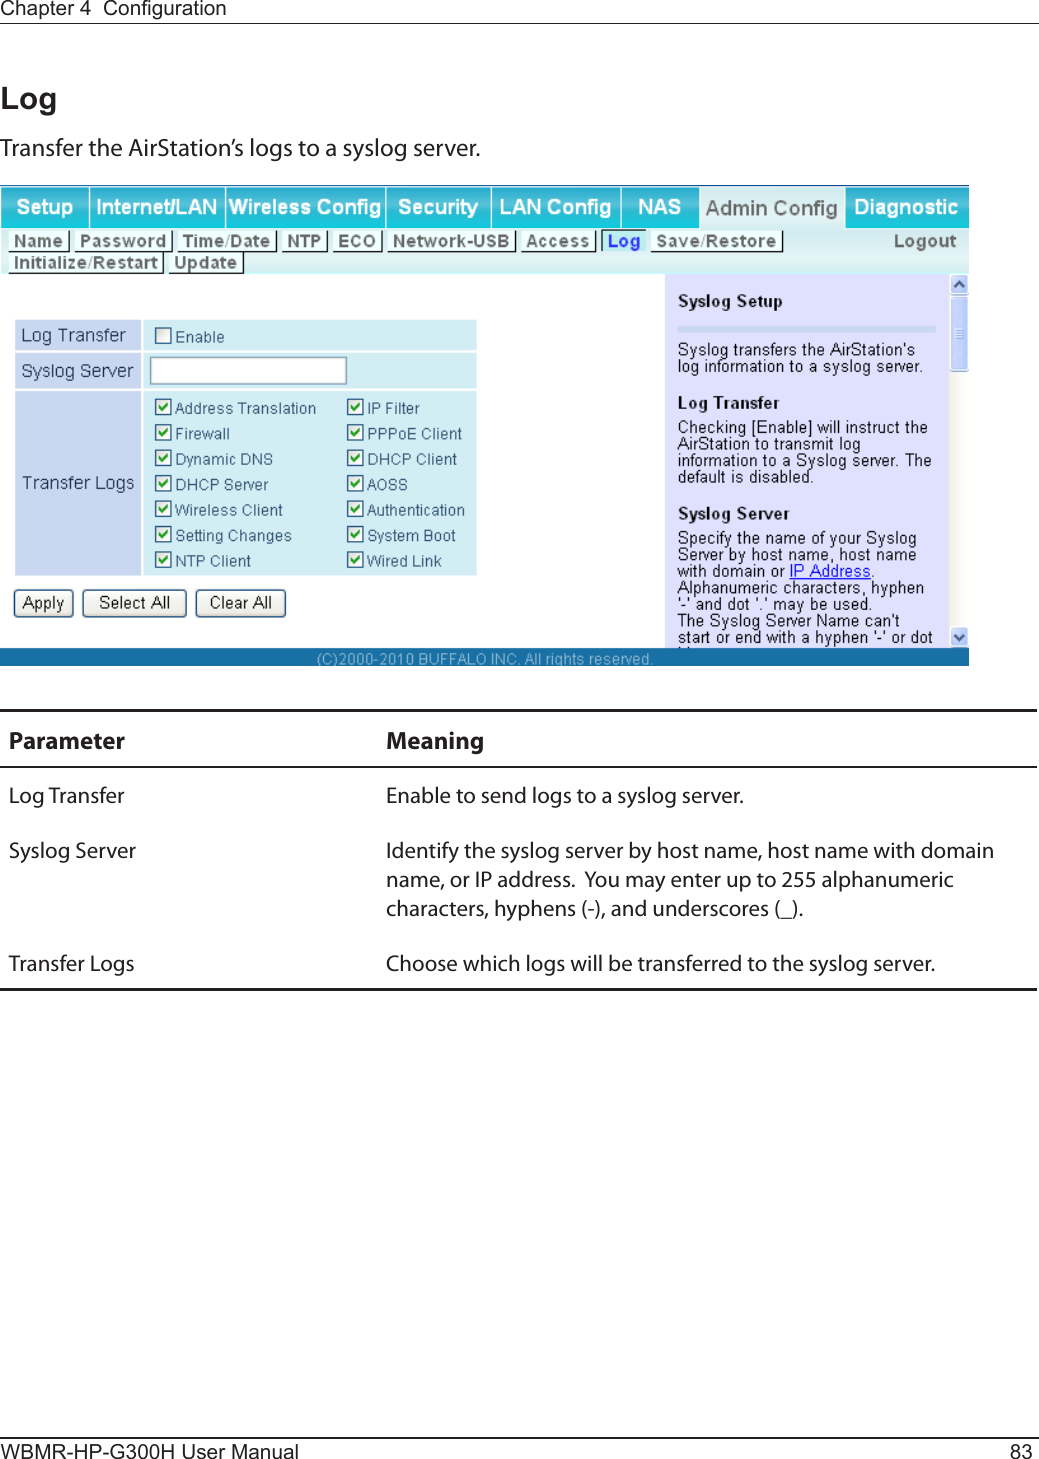 Chapter 4  CongurationWBMR-HP-G300H User Manual 83LogTransfer the AirStation’s logs to a syslog server.Parameter MeaningLog Transfer Enable to send logs to a syslog server.Syslog Server Identify the syslog server by host name, host name with domain name, or IP address.  You may enter up to 255 alphanumeric characters, hyphens (-), and underscores (_).Transfer Logs Choose which logs will be transferred to the syslog server.